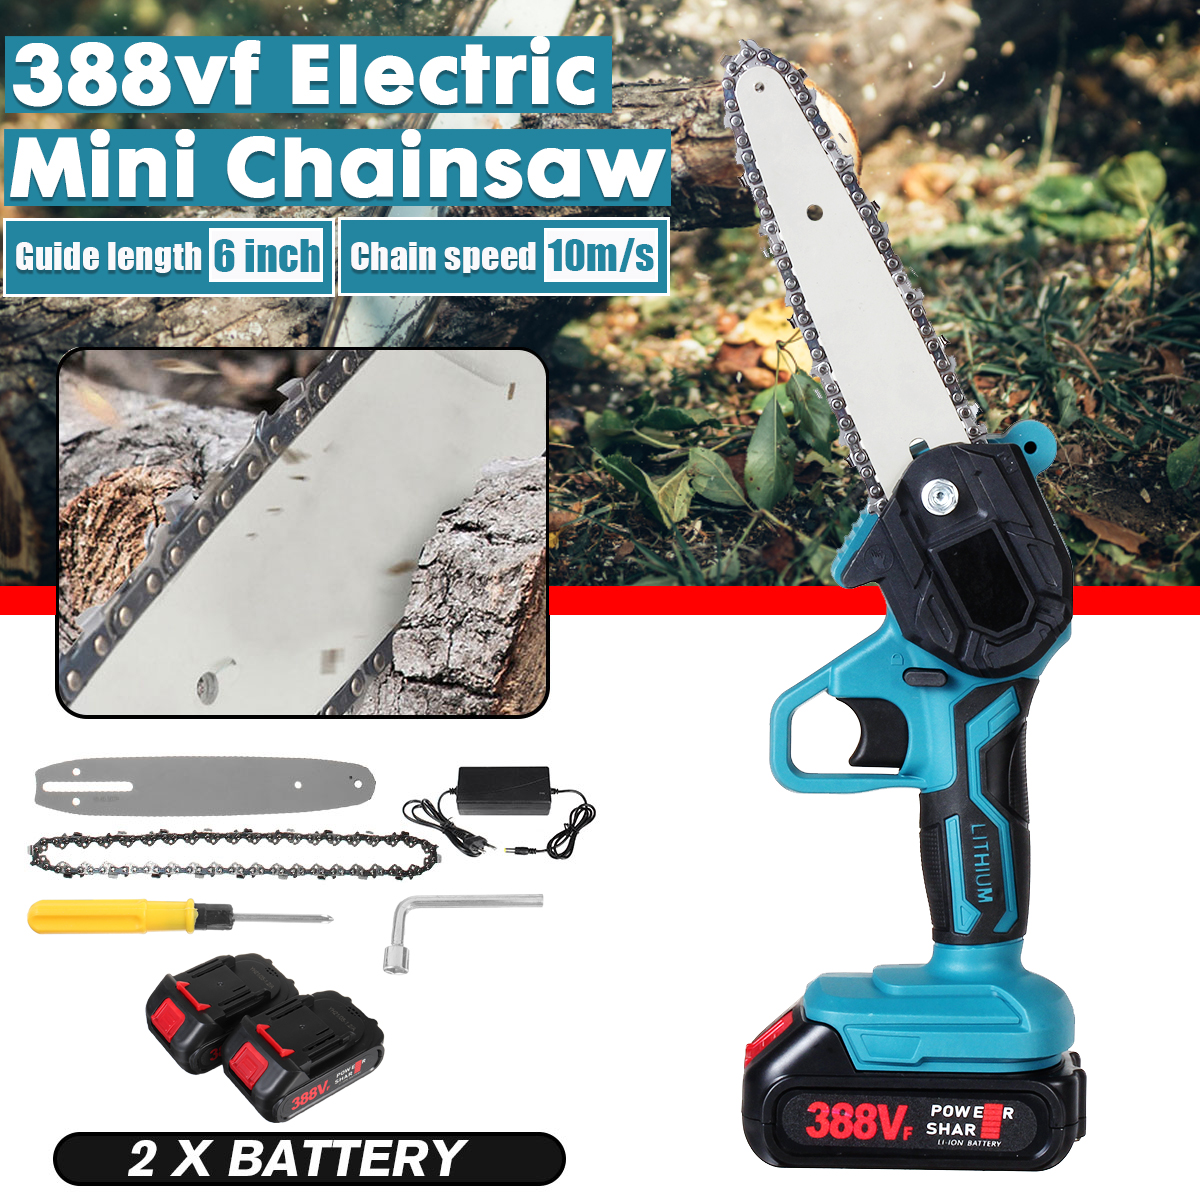 6-Inch-Mini-Cordless-Electric-Chainsaw-Woodworking-Wood-Cutter-Rechargeable-Portable-Chain-Saw-W-Non-1863317-1